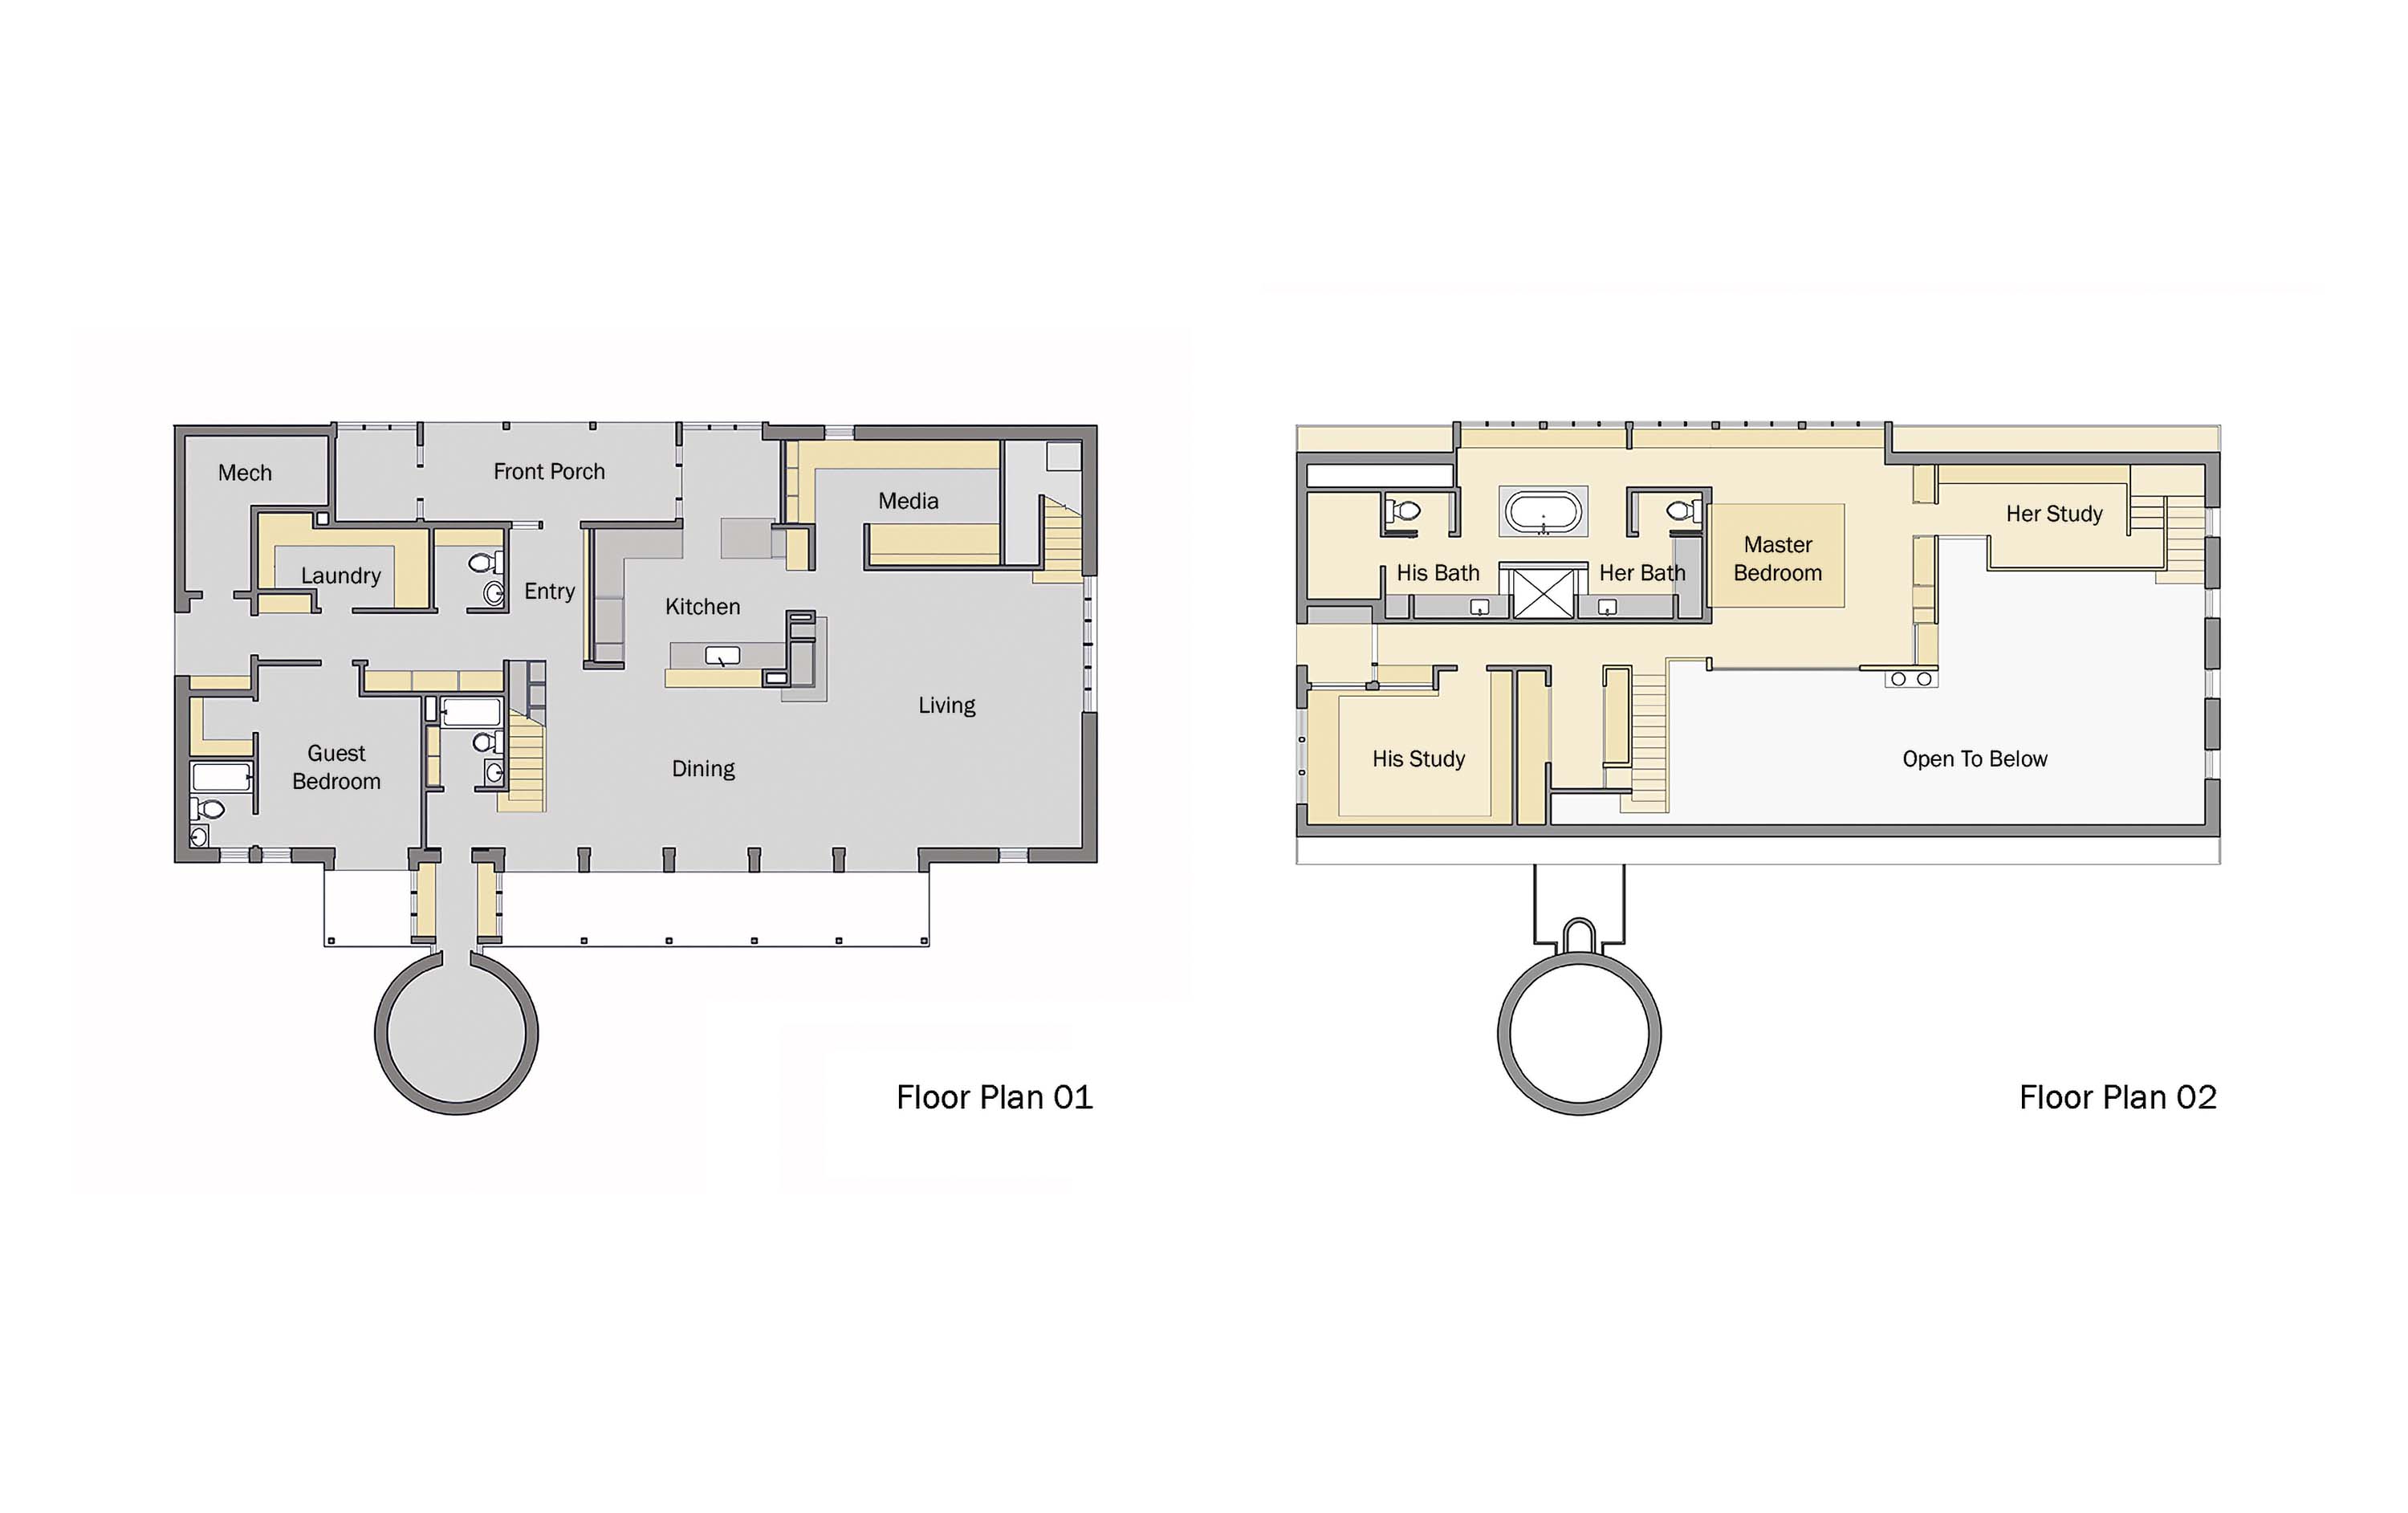 First and second floor plan of Modern Barn by Specht Novak Architects.